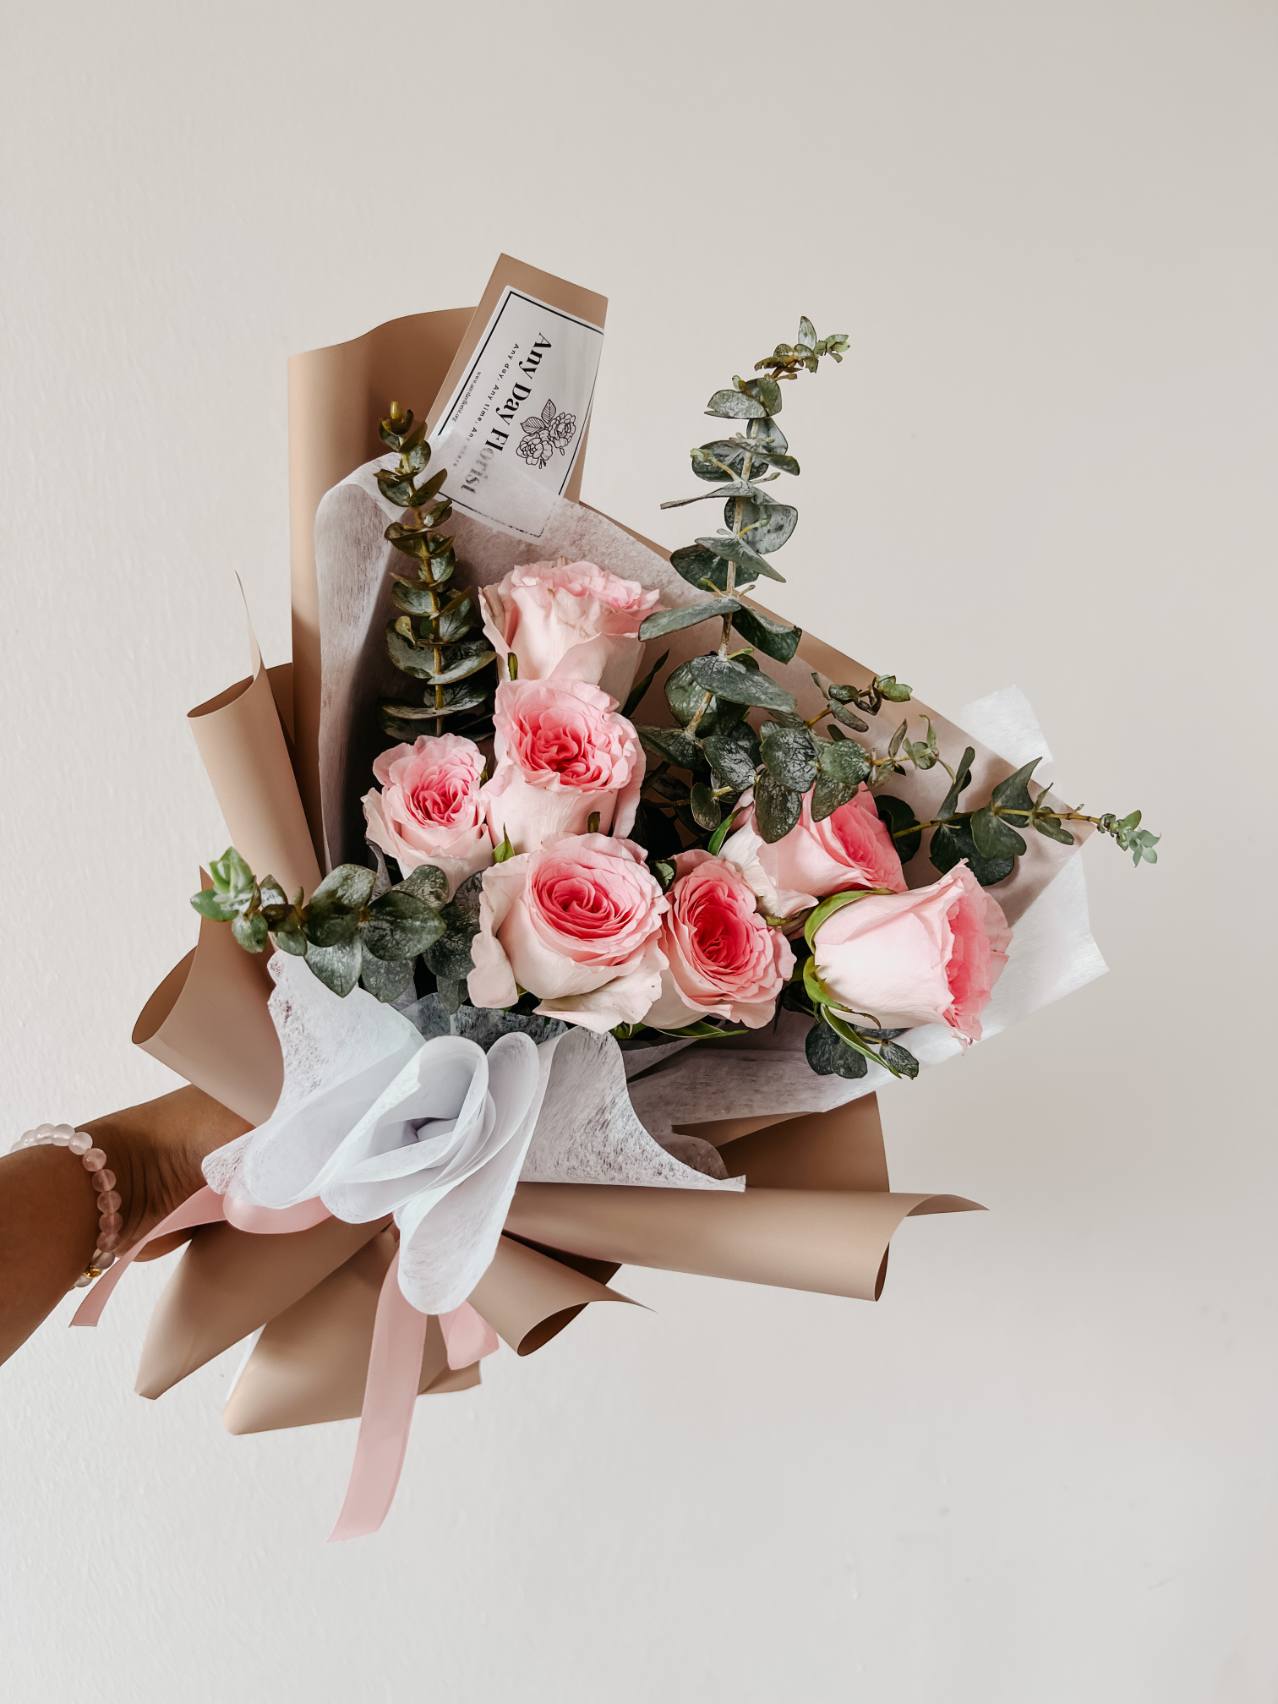 Any Day Florist
A rose by any other name would smell as sweet  This beautiful 8 pink roses' bouquet is perfect for any occasion. The soft, colorful flowers are arranged in a vase fRoselle Bouquet | 8 Pink Roses Bouquet